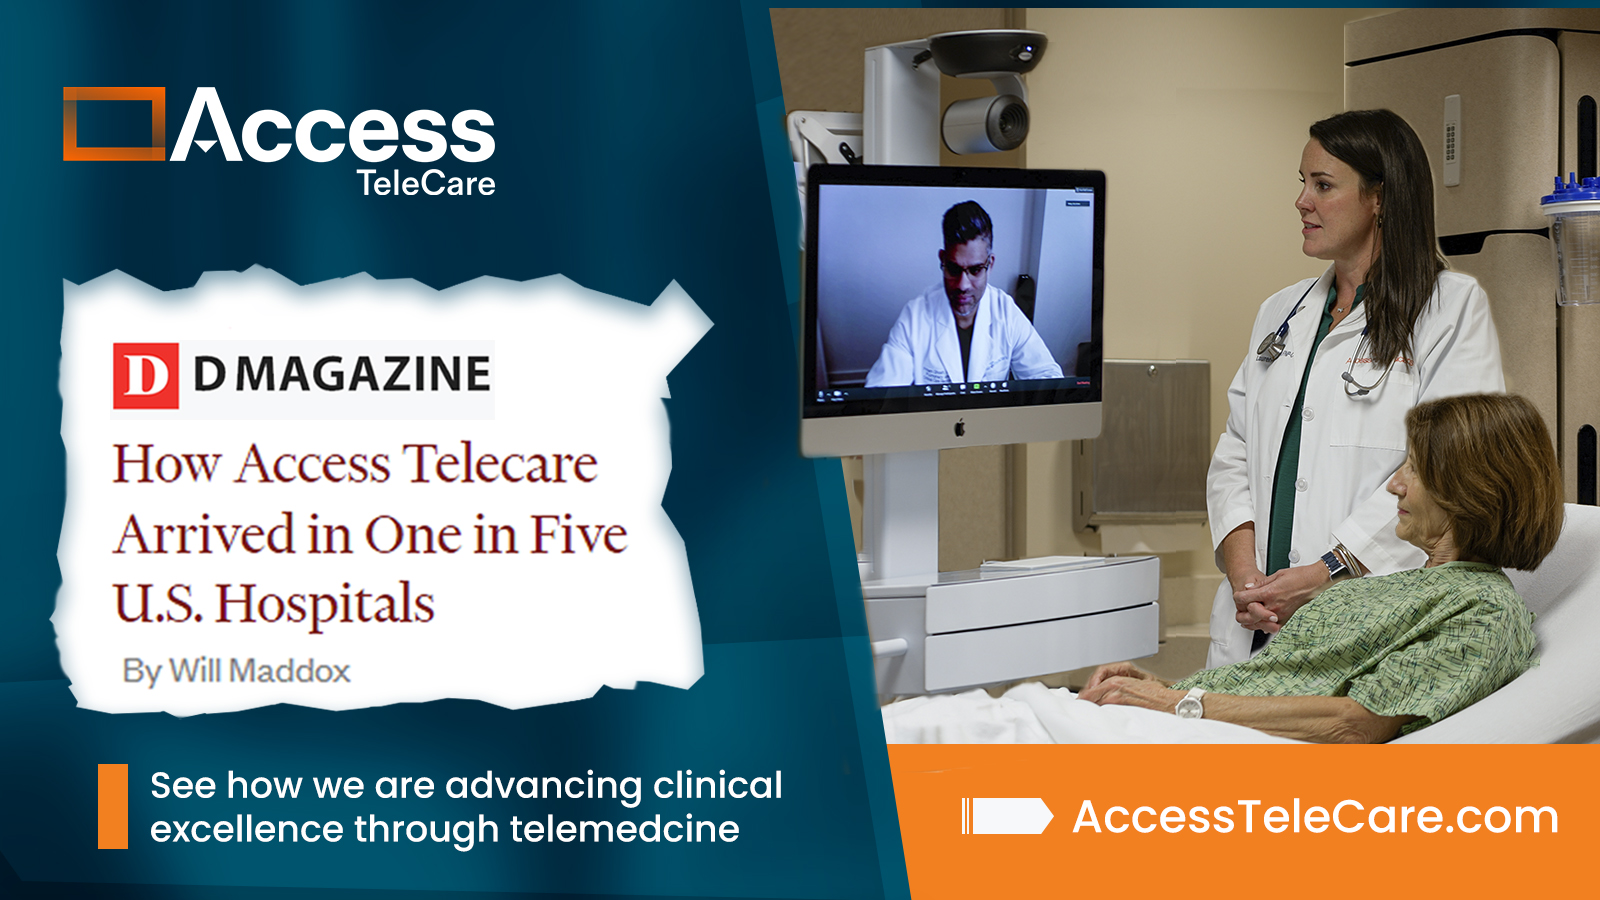 A depiction of how Access TeleCare's telemedicine is making healthcare more accessible.